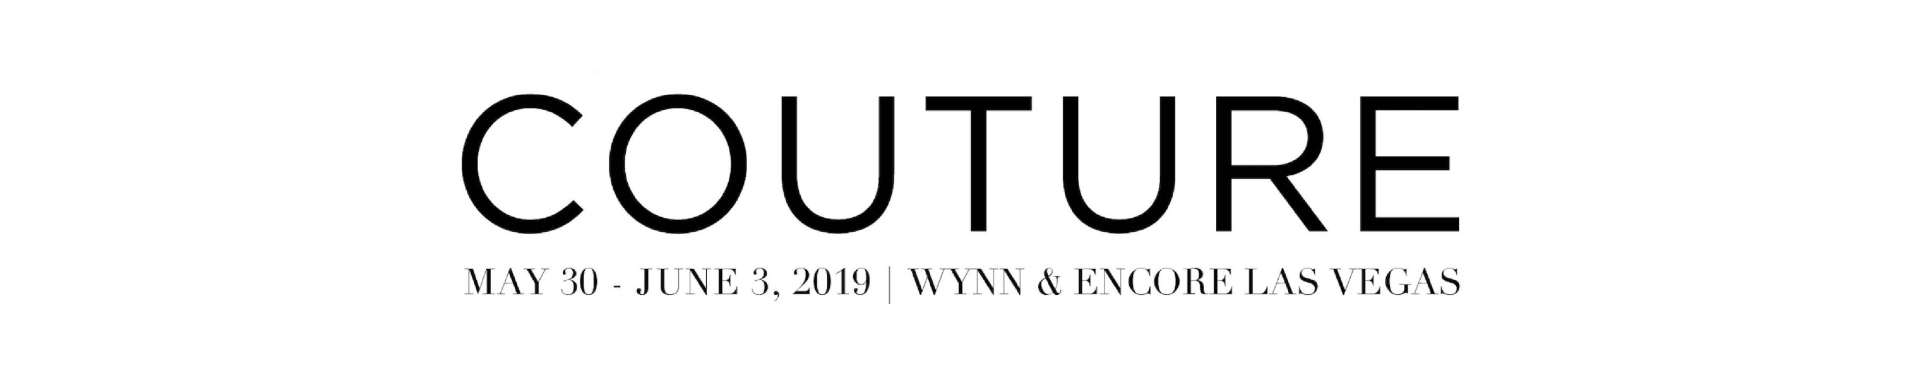 COUTURE 2019 logo small